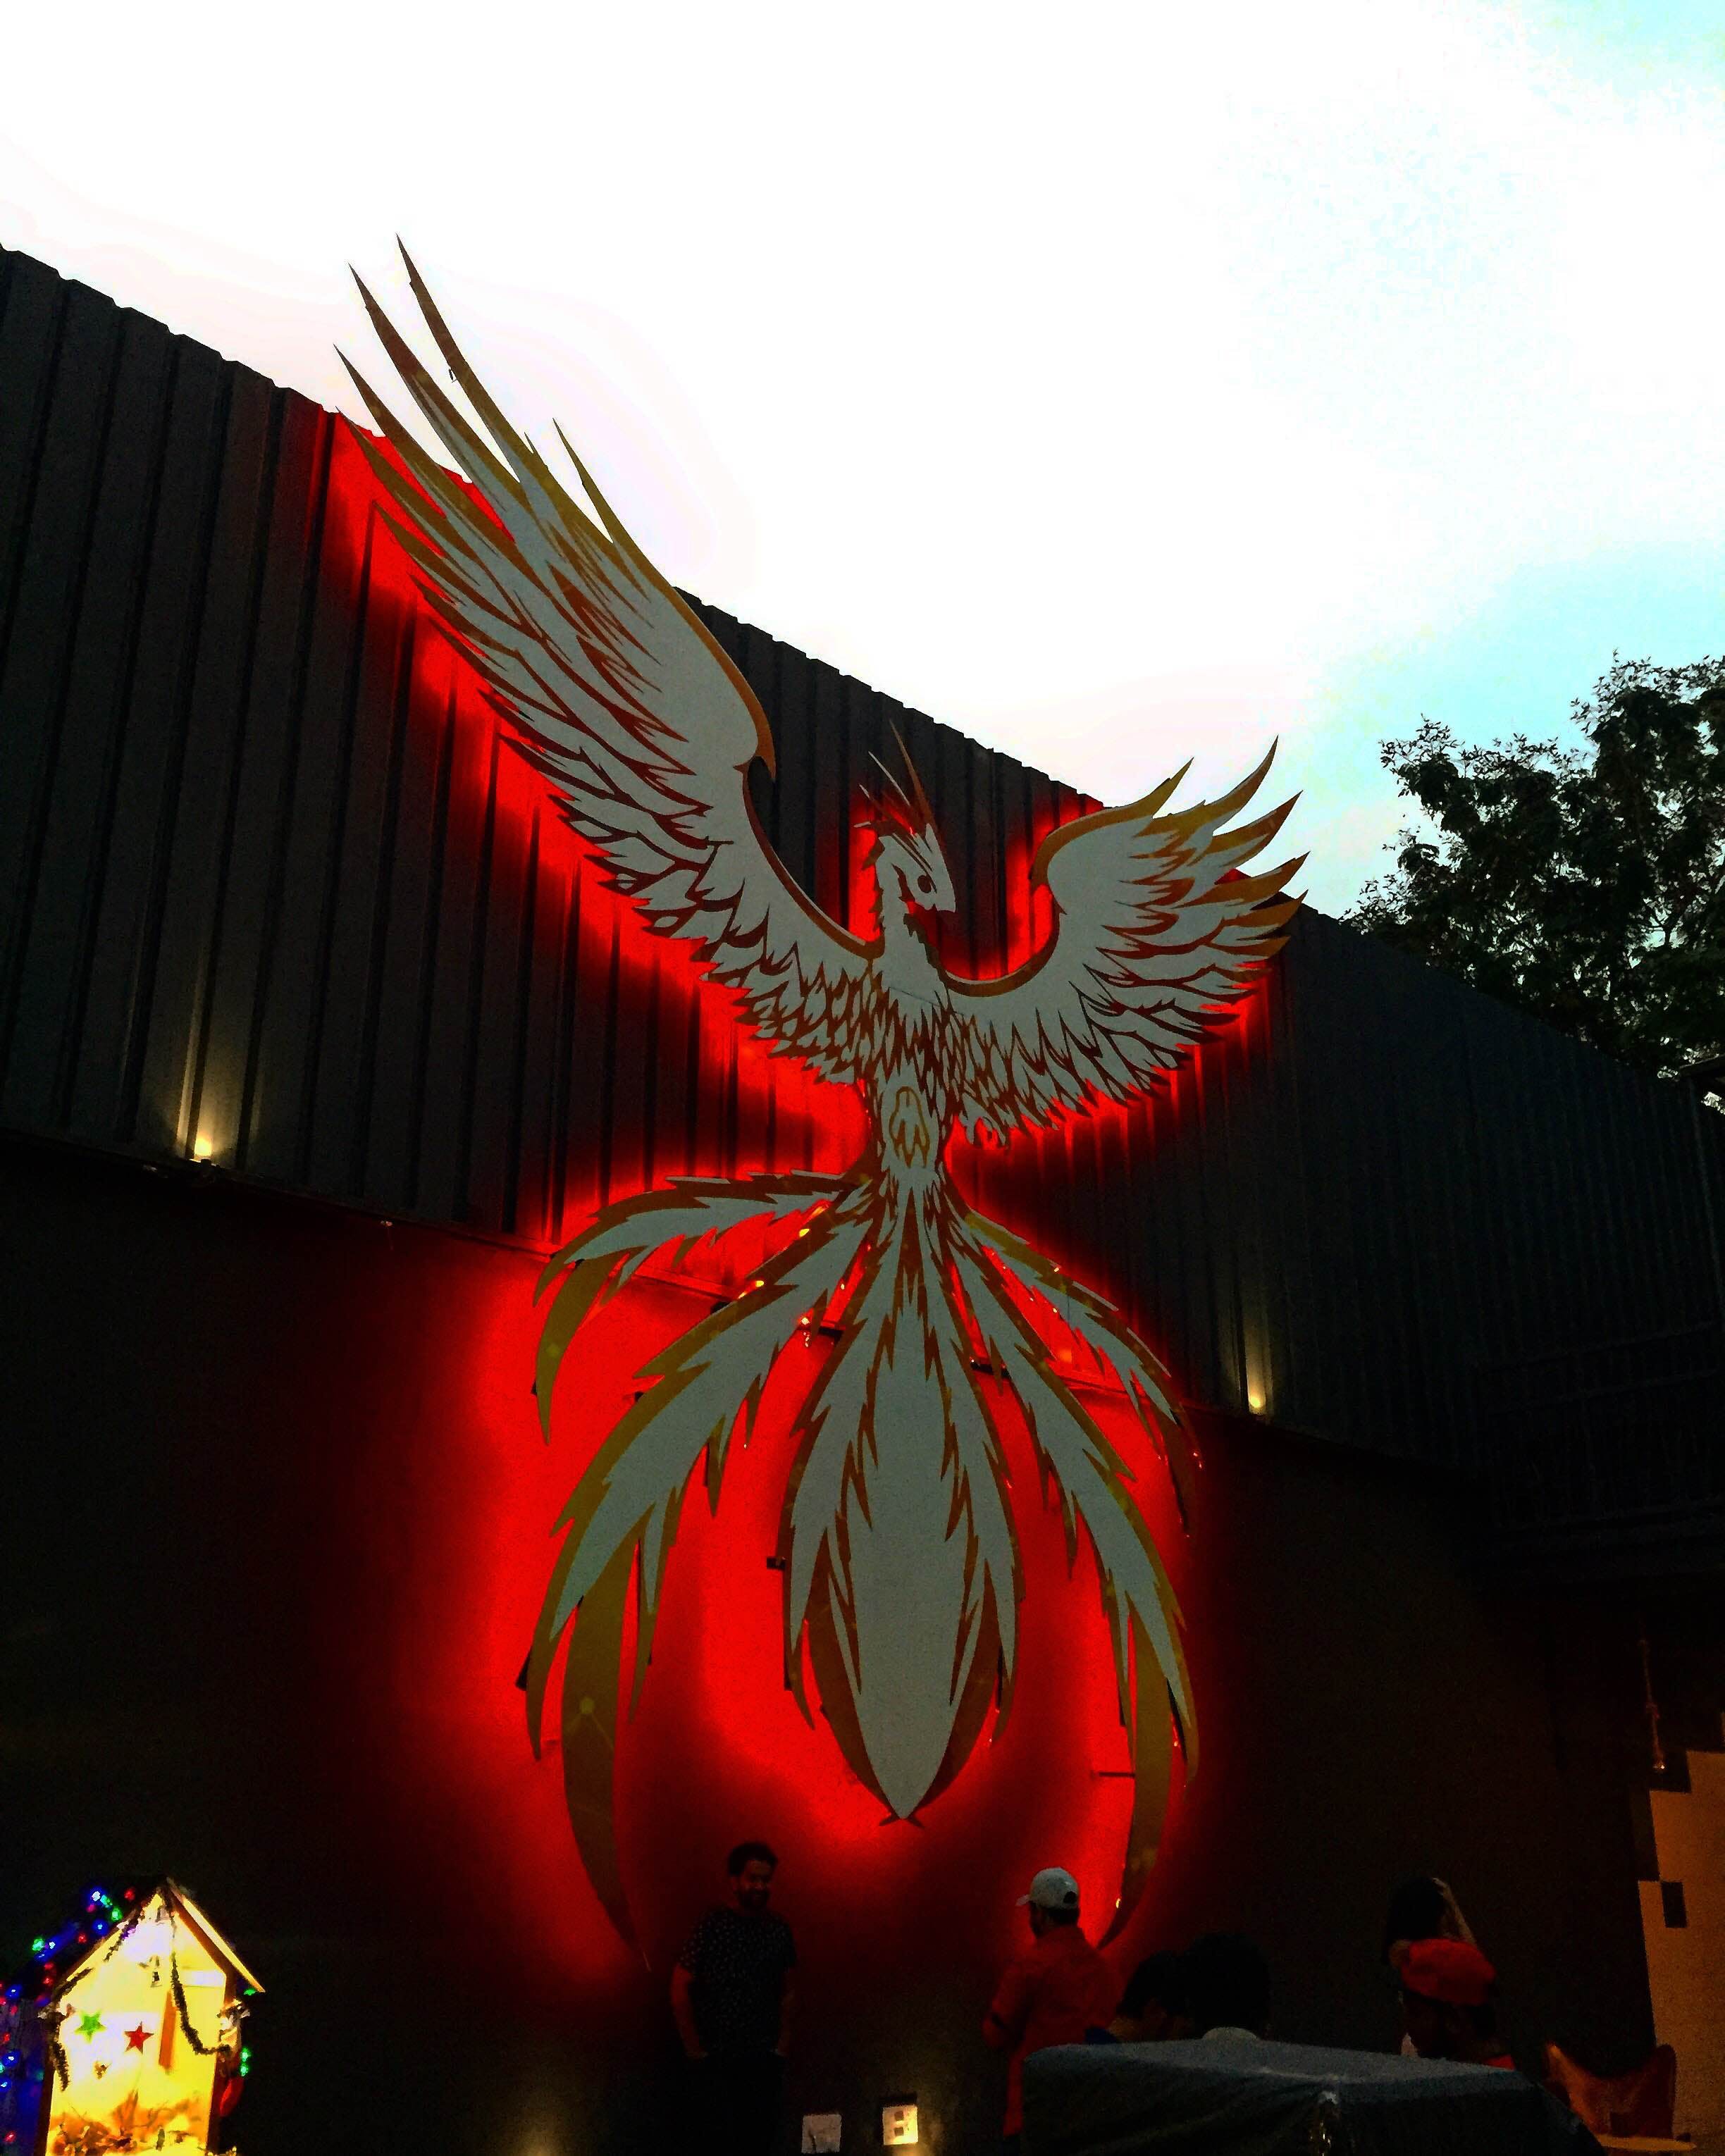 Red,Wing,Night,Architecture,Fictional character,Art